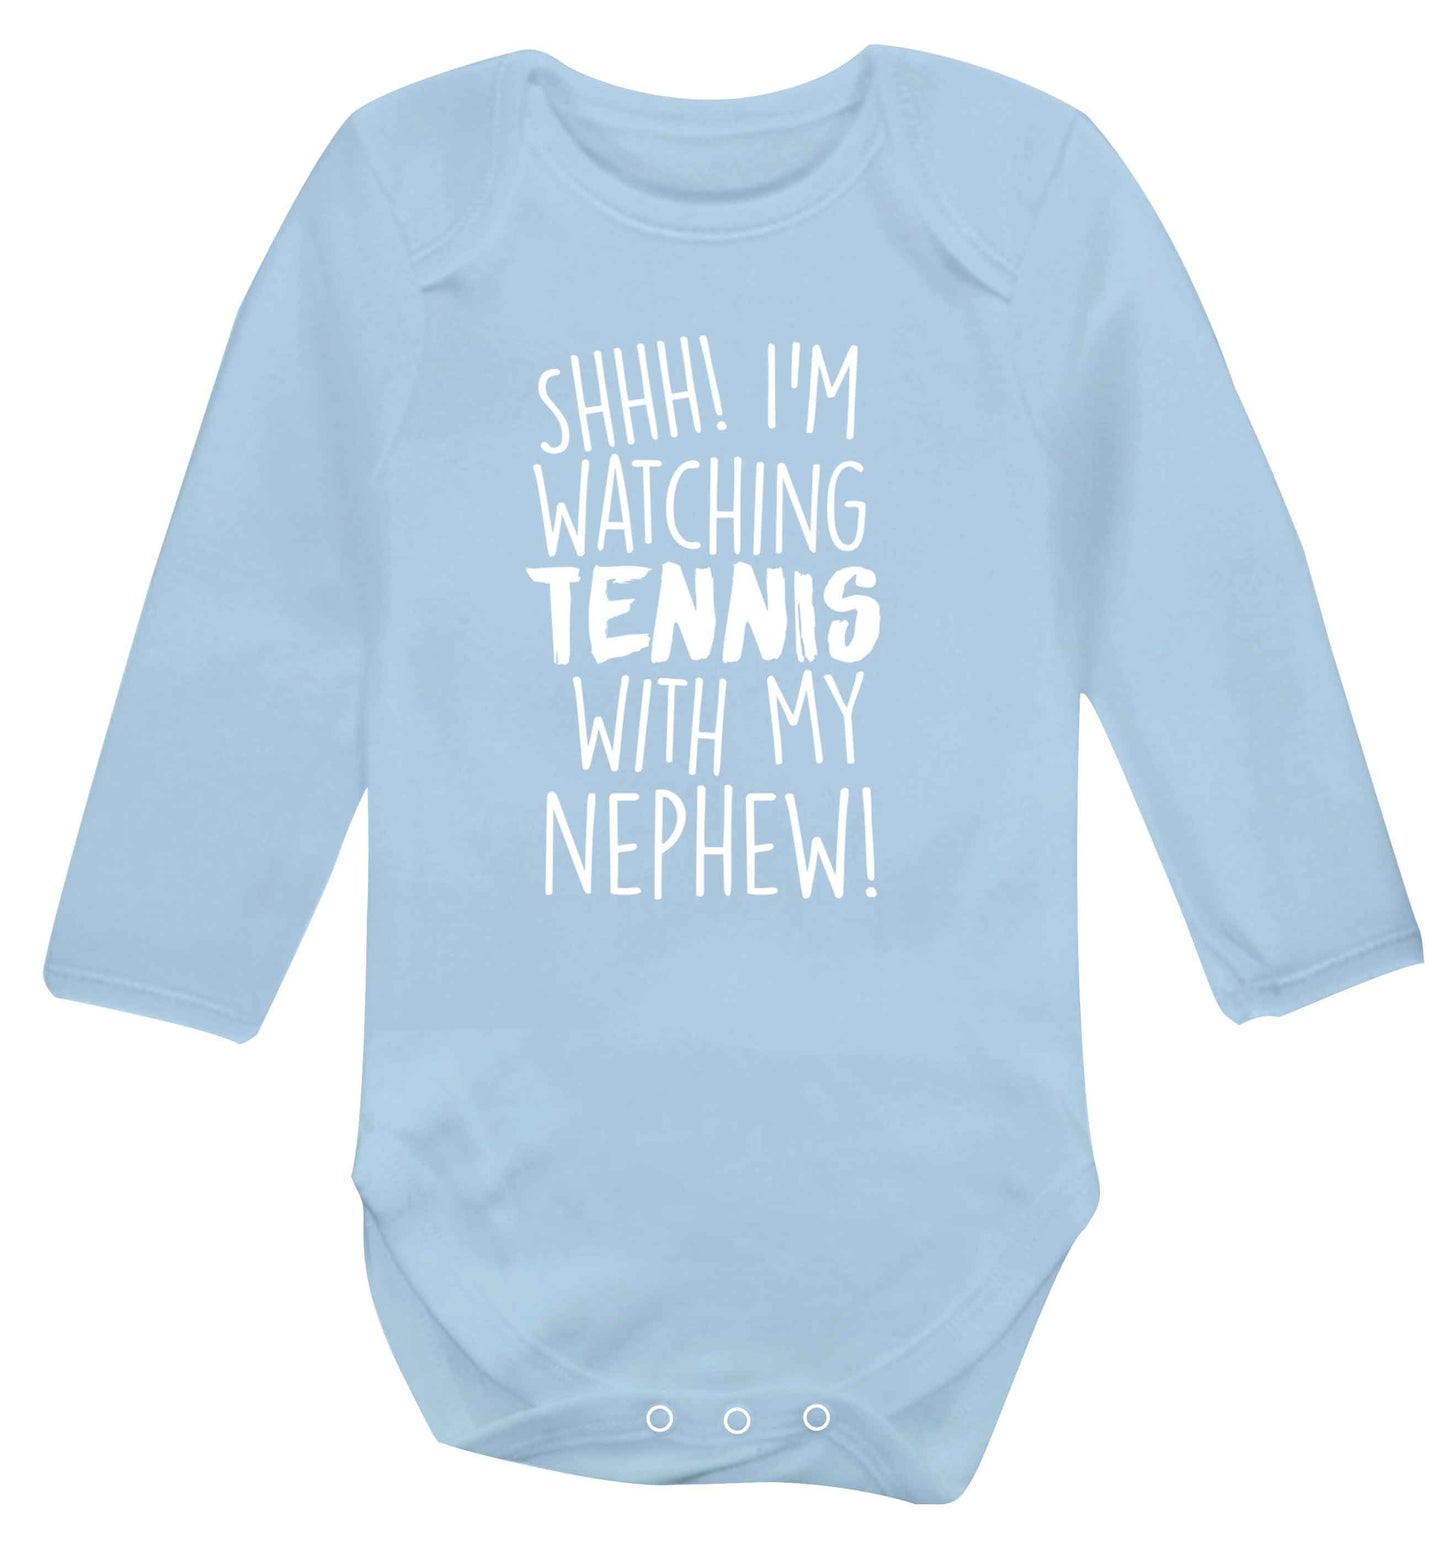 Shh! I'm watching tennis with my nephew! Baby Vest long sleeved pale blue 6-12 months